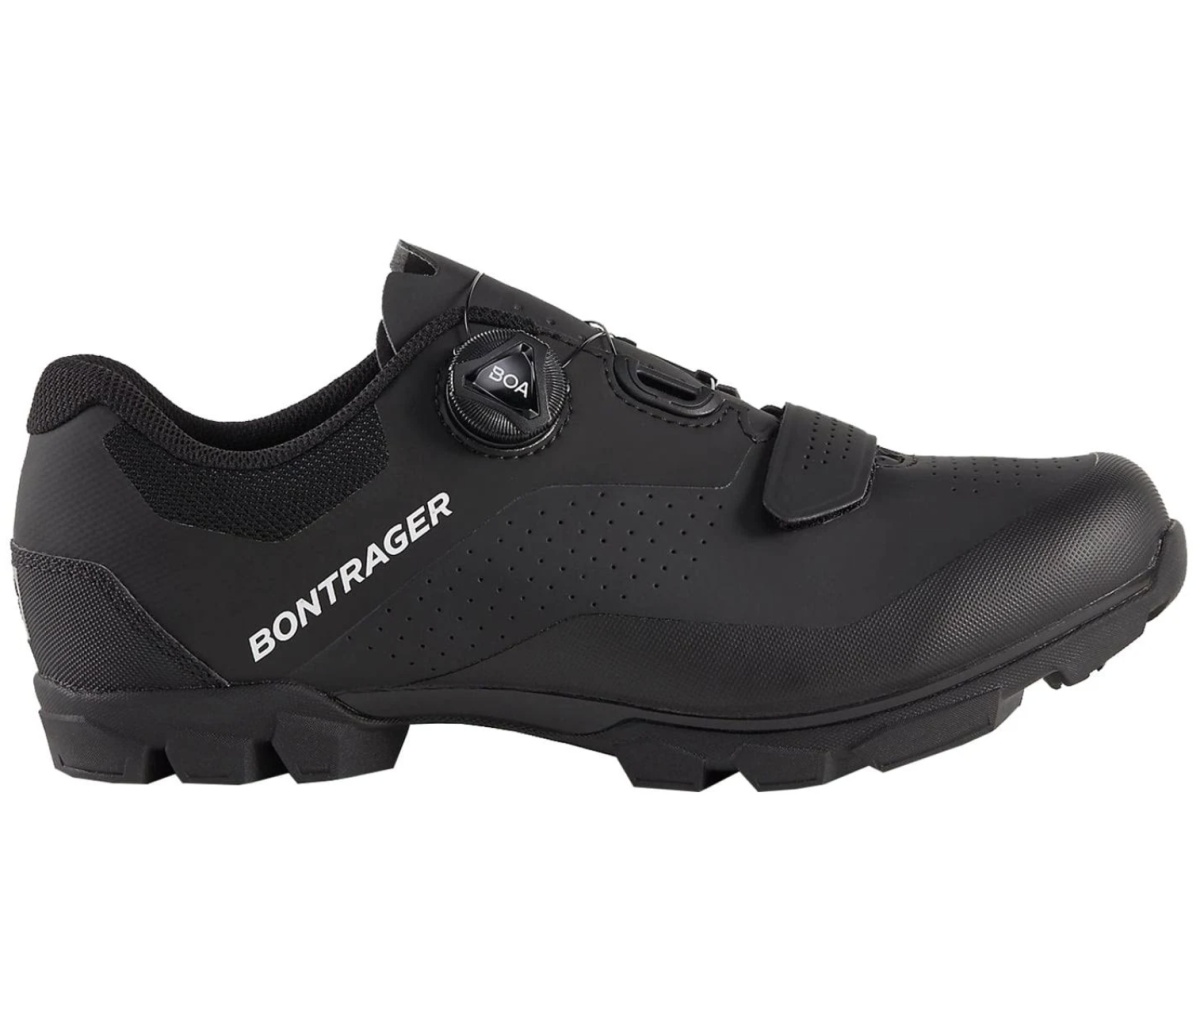 Bontrager Foray - Women's Review